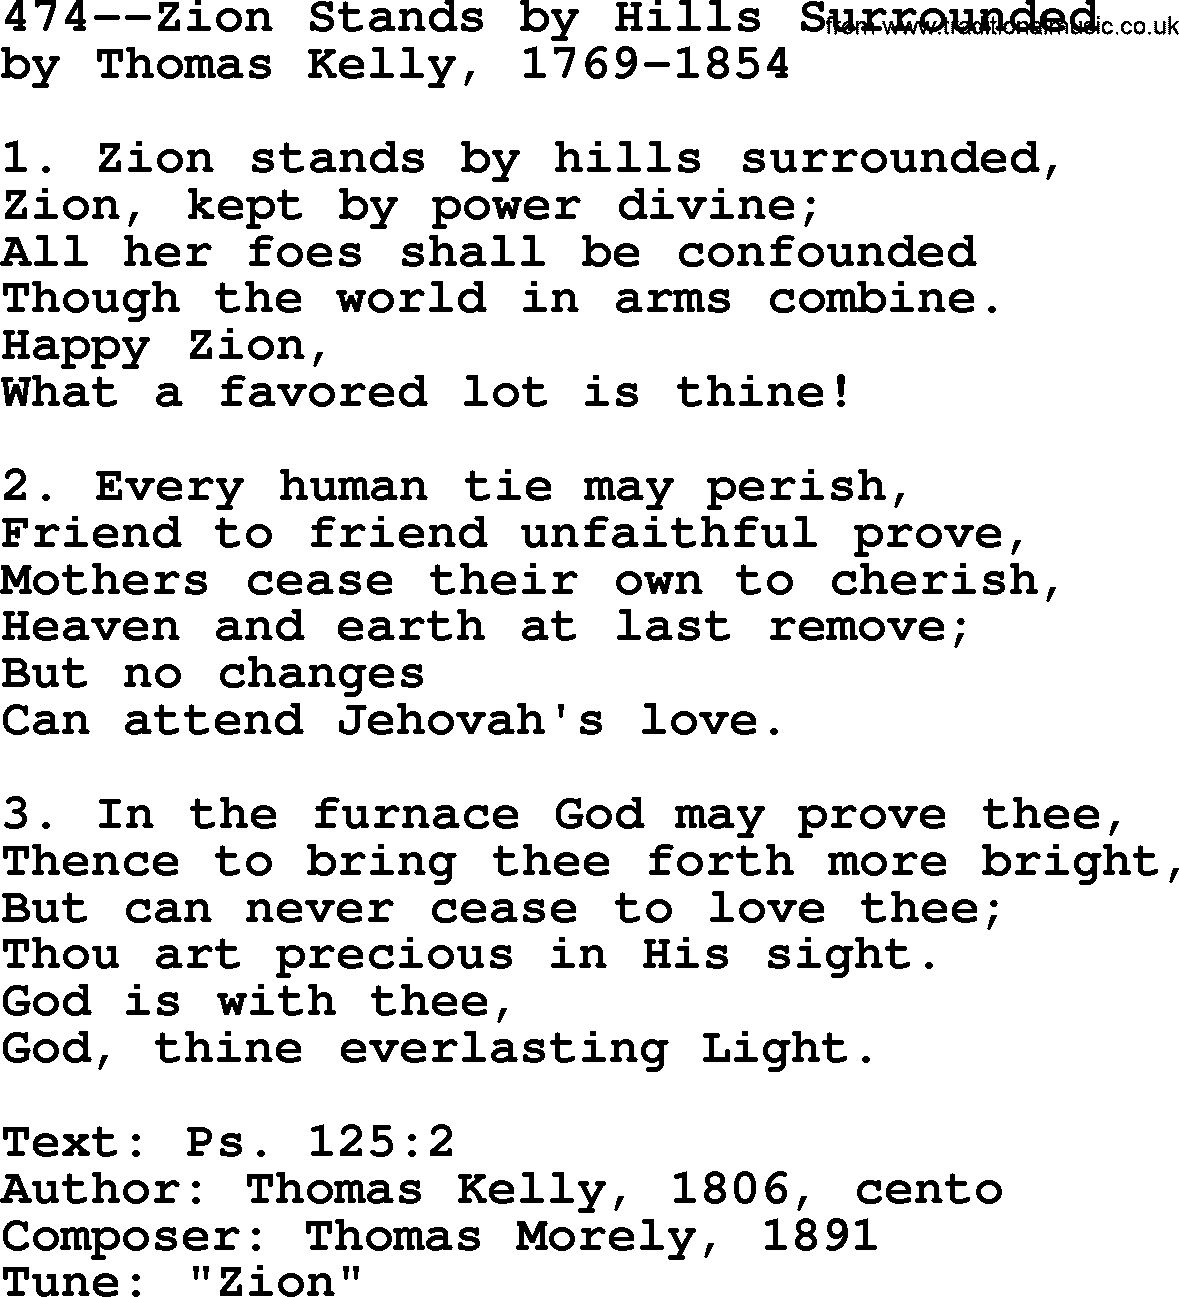 Lutheran Hymn: 474--Zion Stands by Hills Surrounded.txt lyrics with PDF